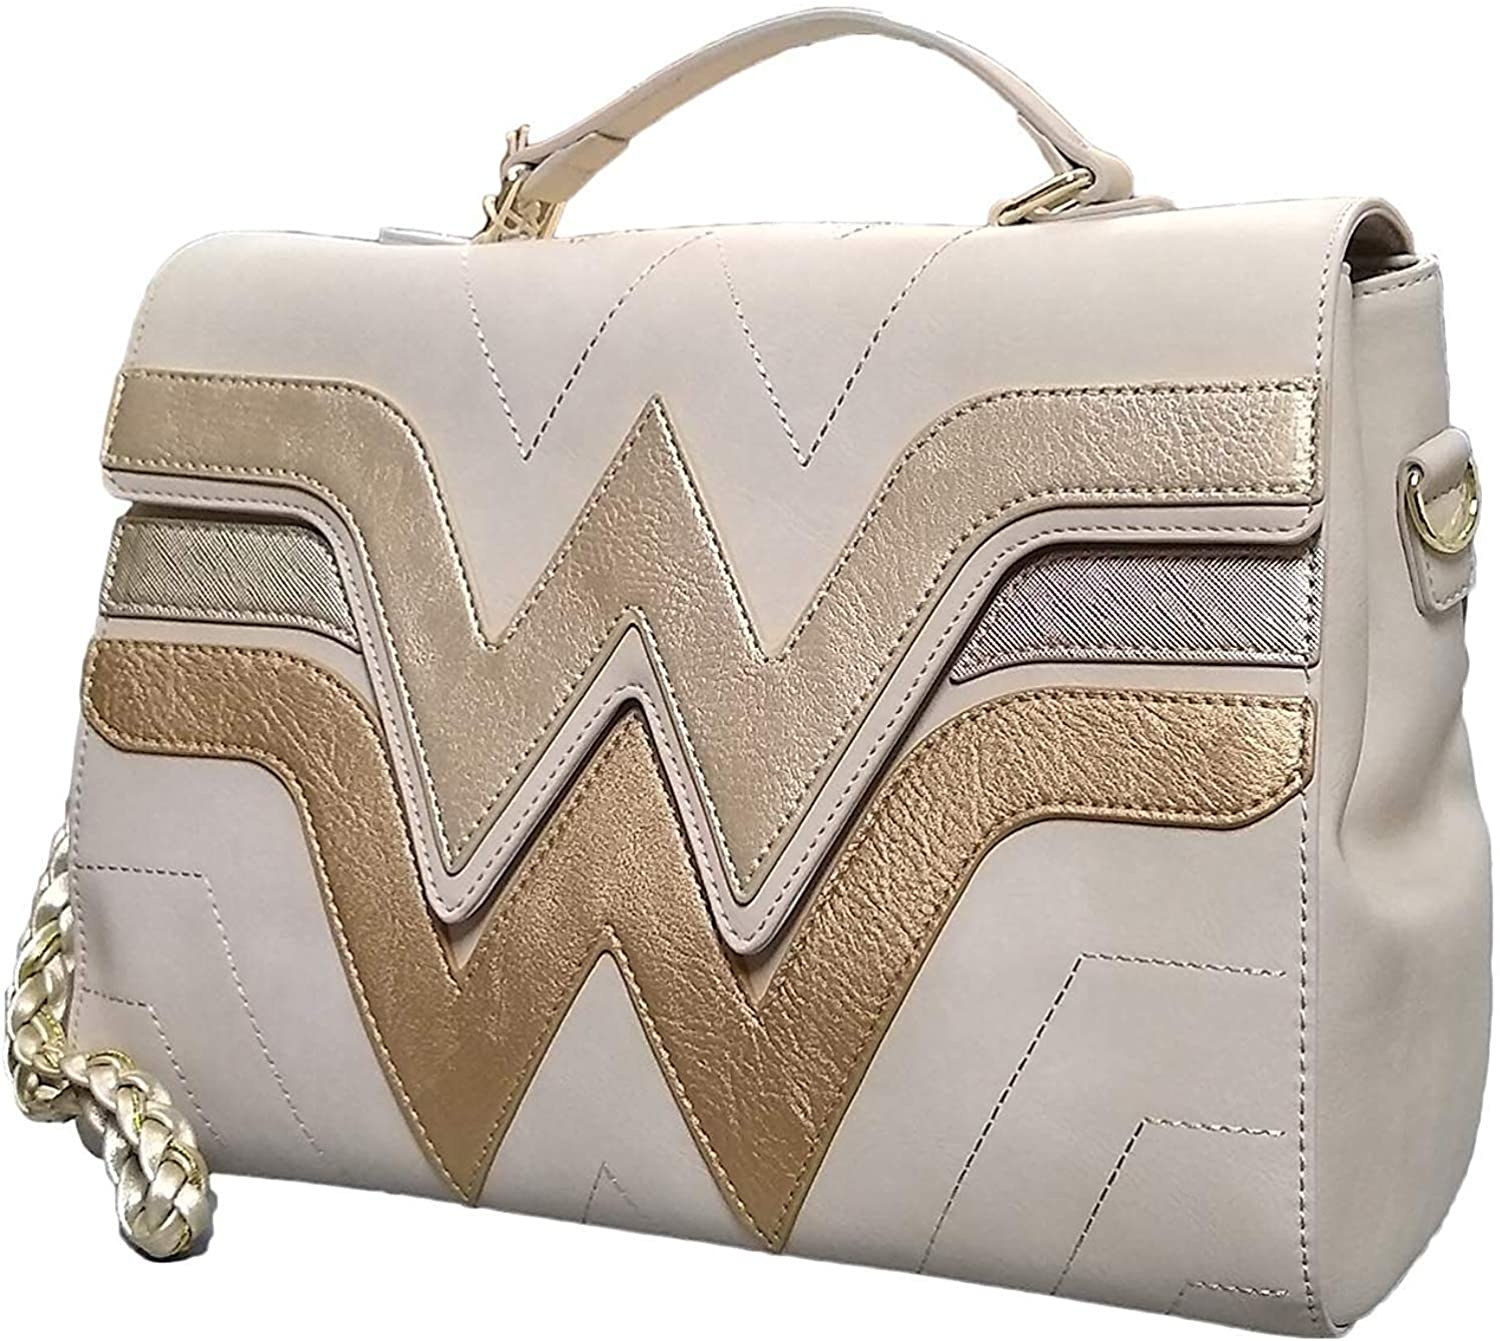 The cream bag stitched with cream, gold, silver, and bronze Wonder Woman W symbols, with a top handle and gold braided charm